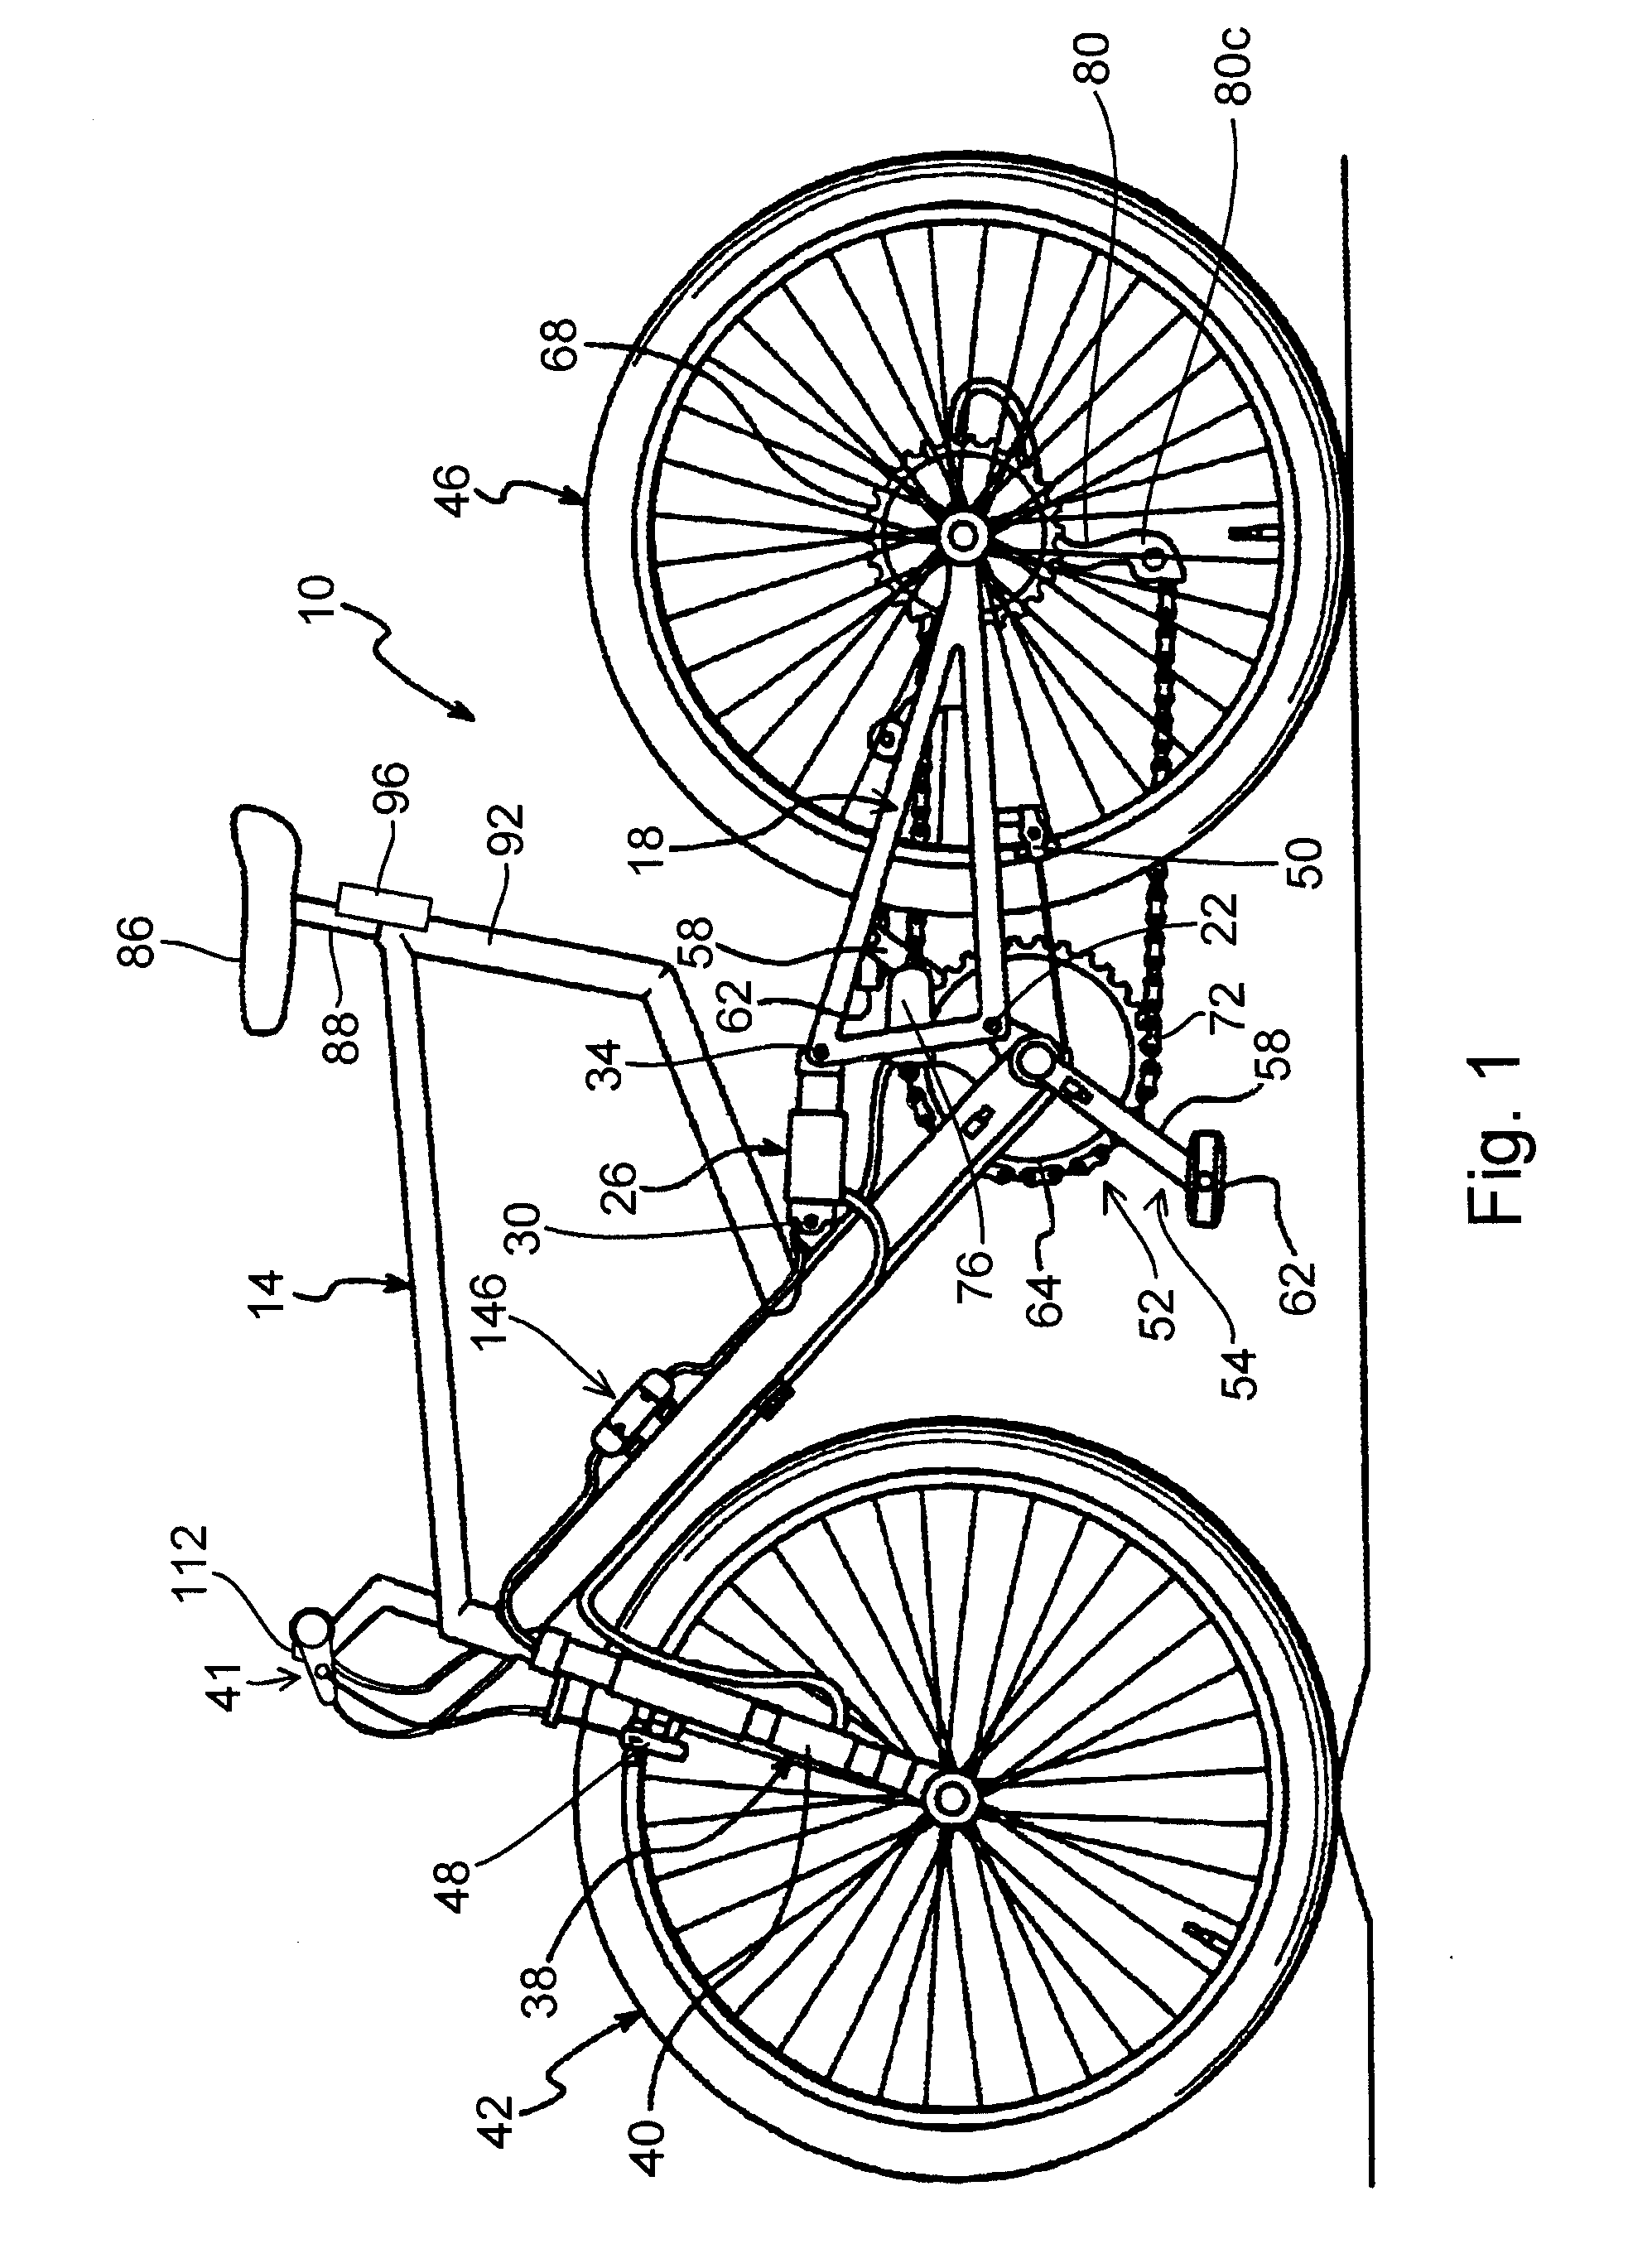 Apparatus for controlling multiple bicycle operating characteristics